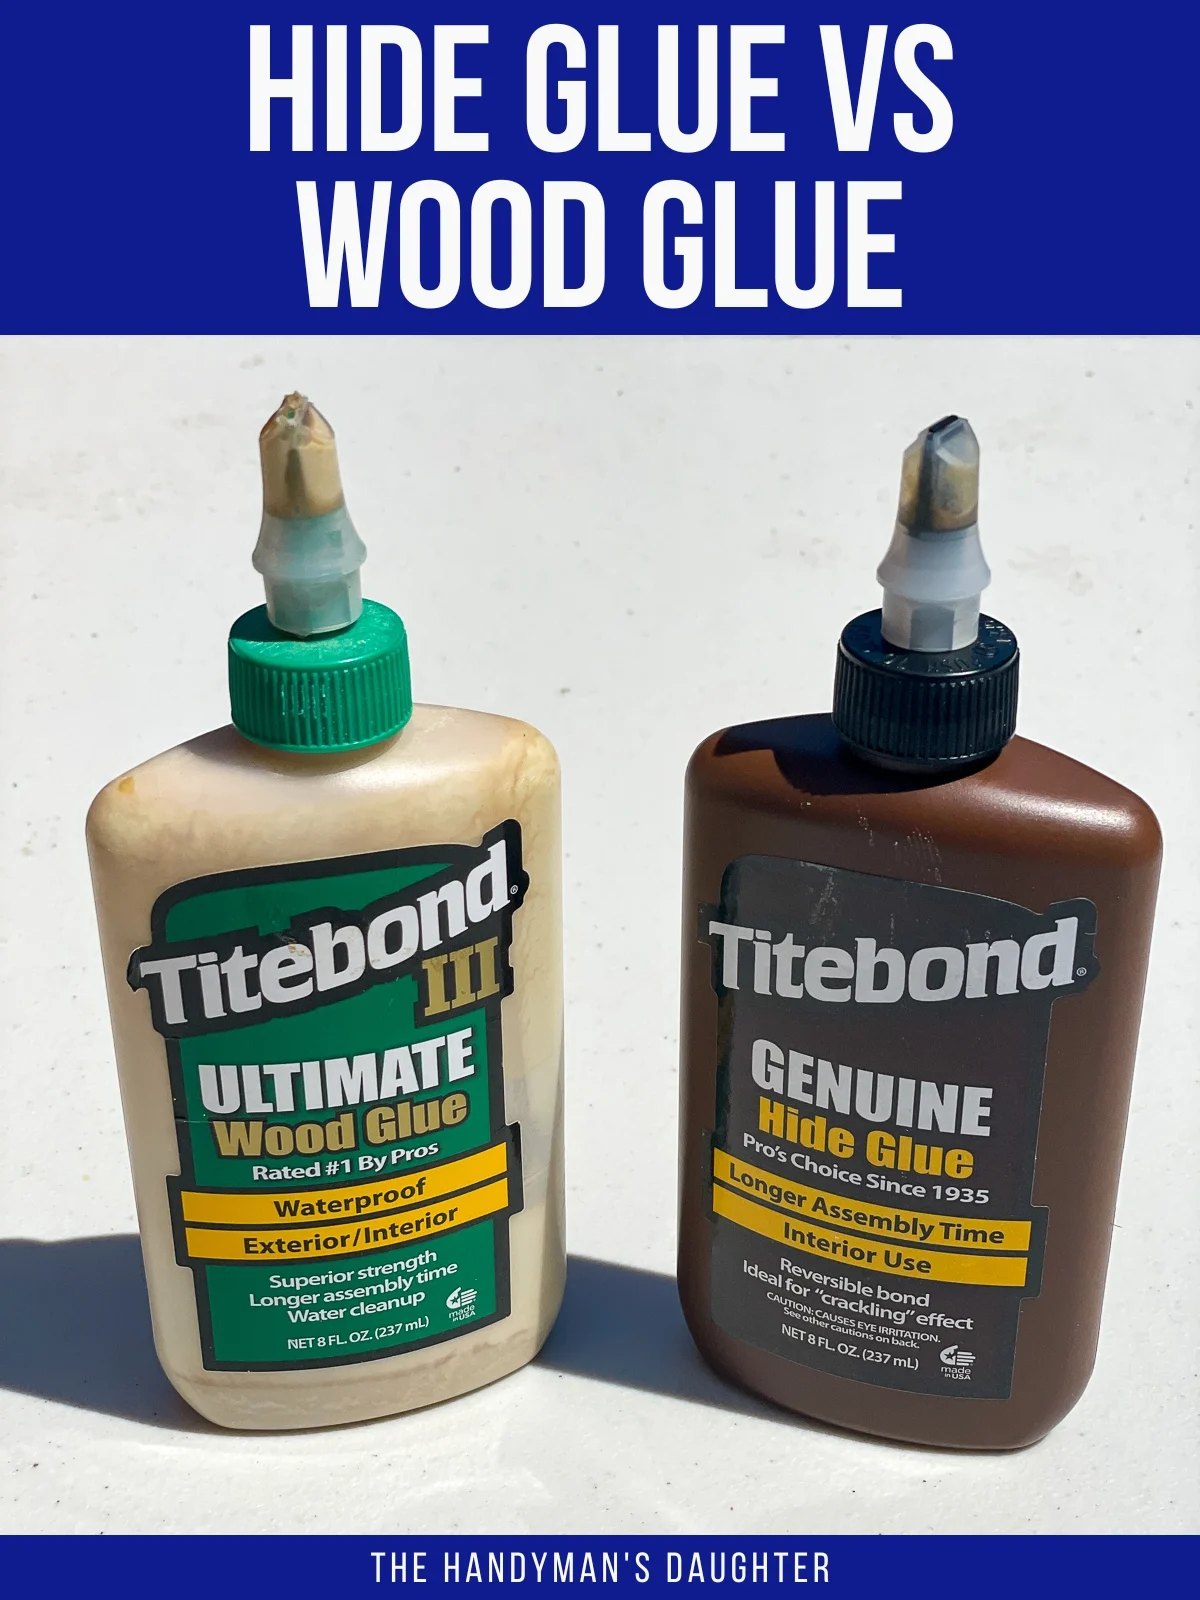 Hide Glue vs Wood Glue - Which is better? - The Handyman's Daughter